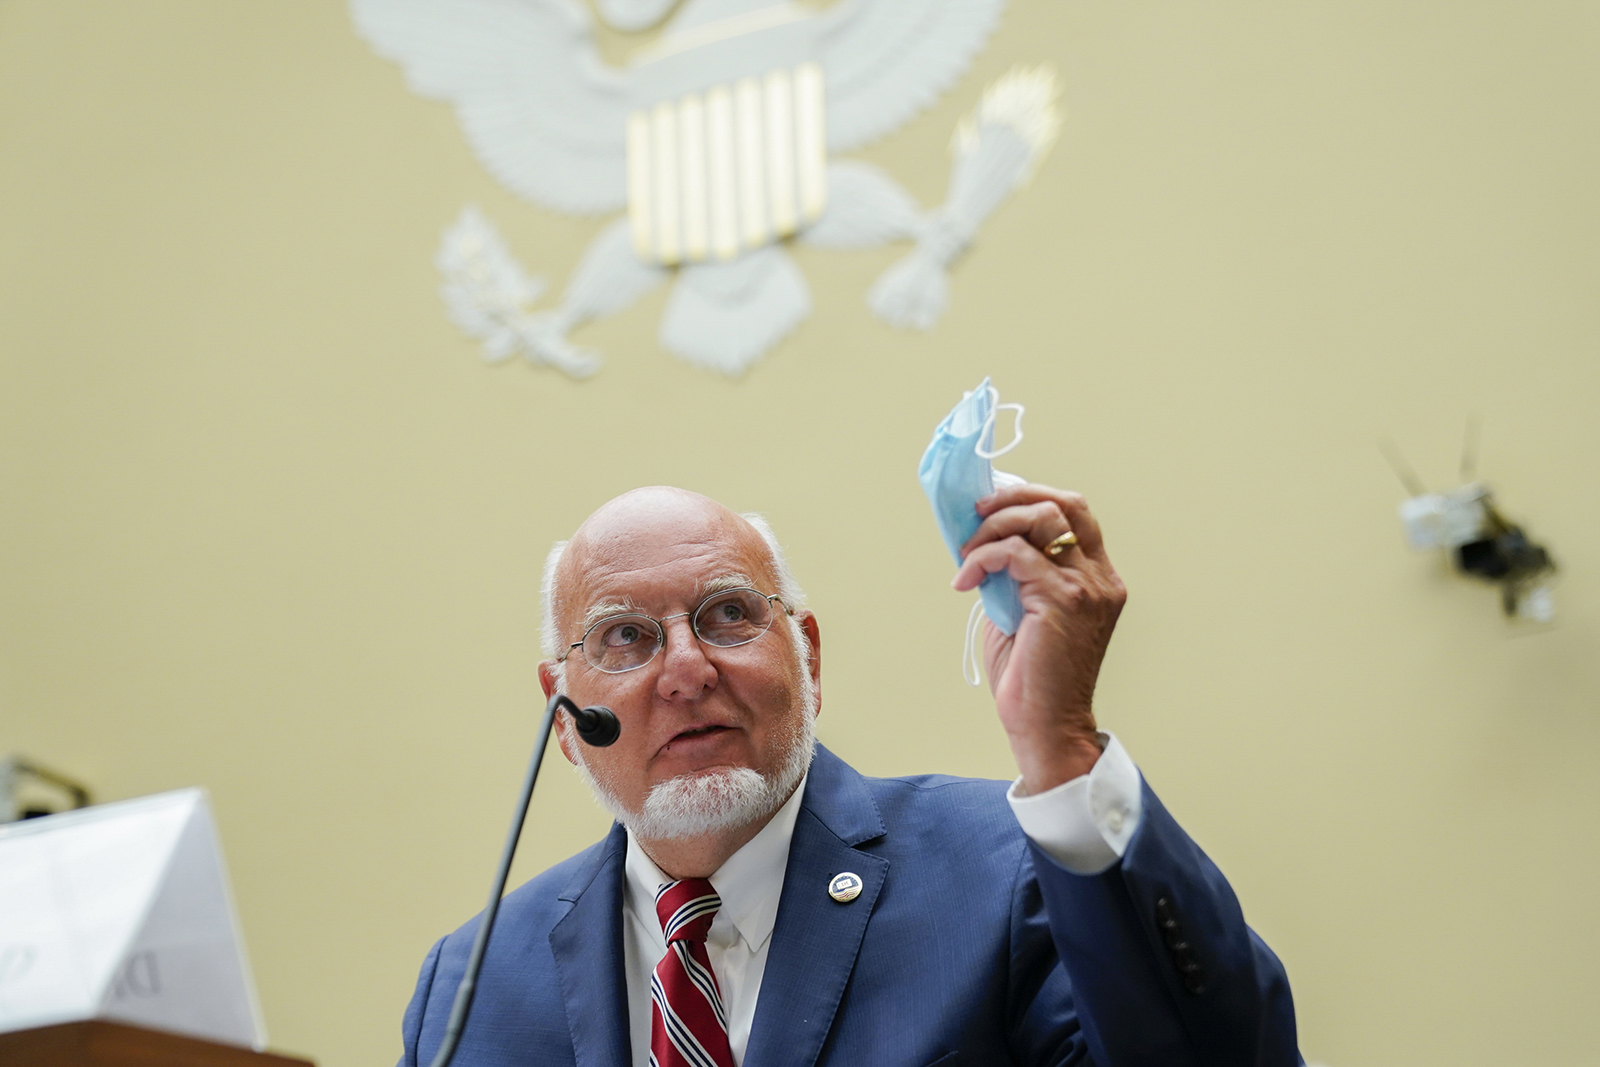 Robert Redfield, director of the Centers for Disease Control and Prevention (CDC) holds a protective mask while testifying during a House Select Subcommittee on the Coronavirus Crisis hearing on July 31 in Washington.